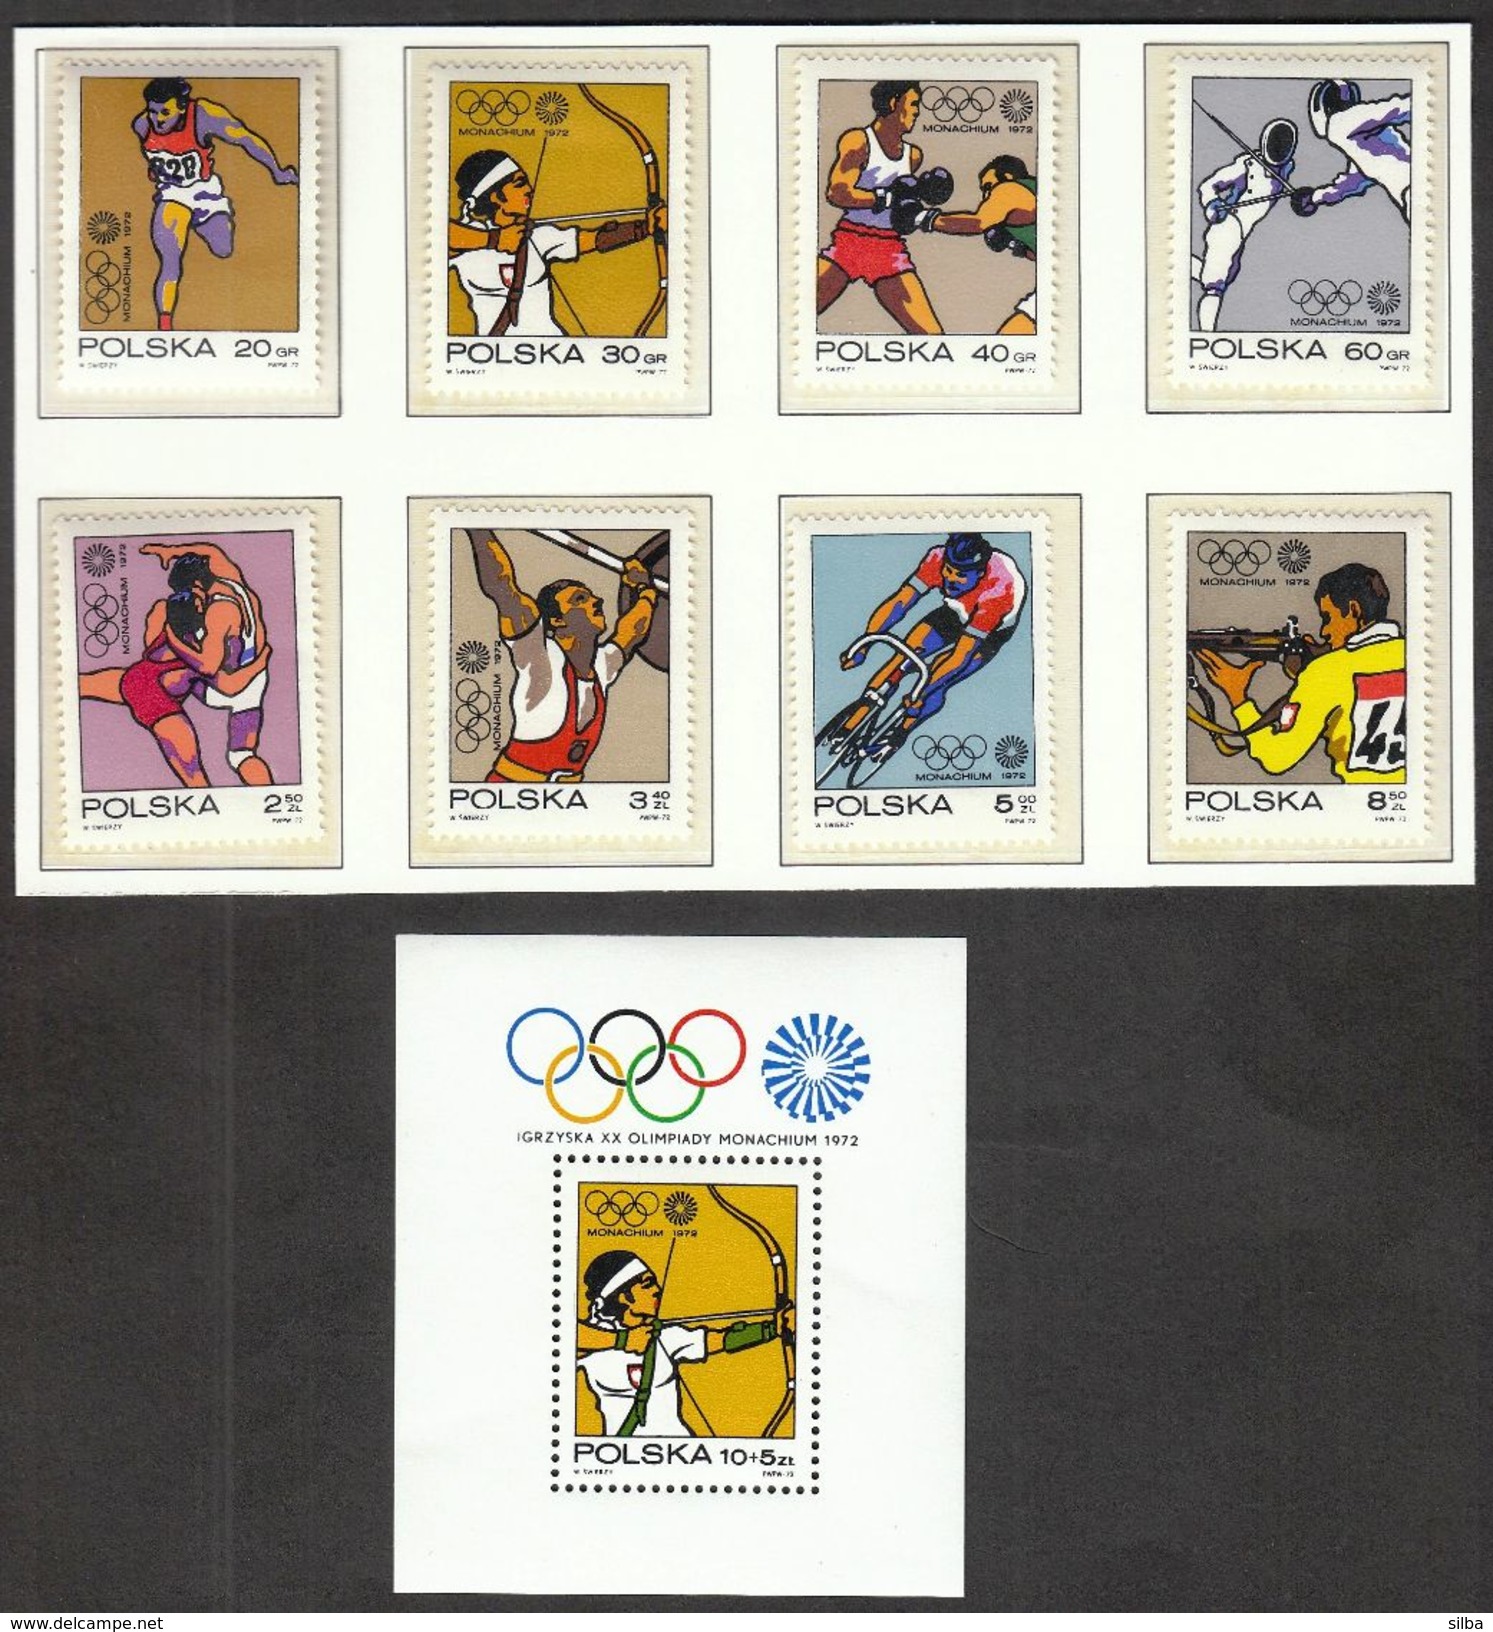 Poland 1972 / Olympic Games Munich / Athletics, Archery, Boxing, Fencing, Wrestling, Cycling, Shooting / PERFORATED - Ete 1972: Munich